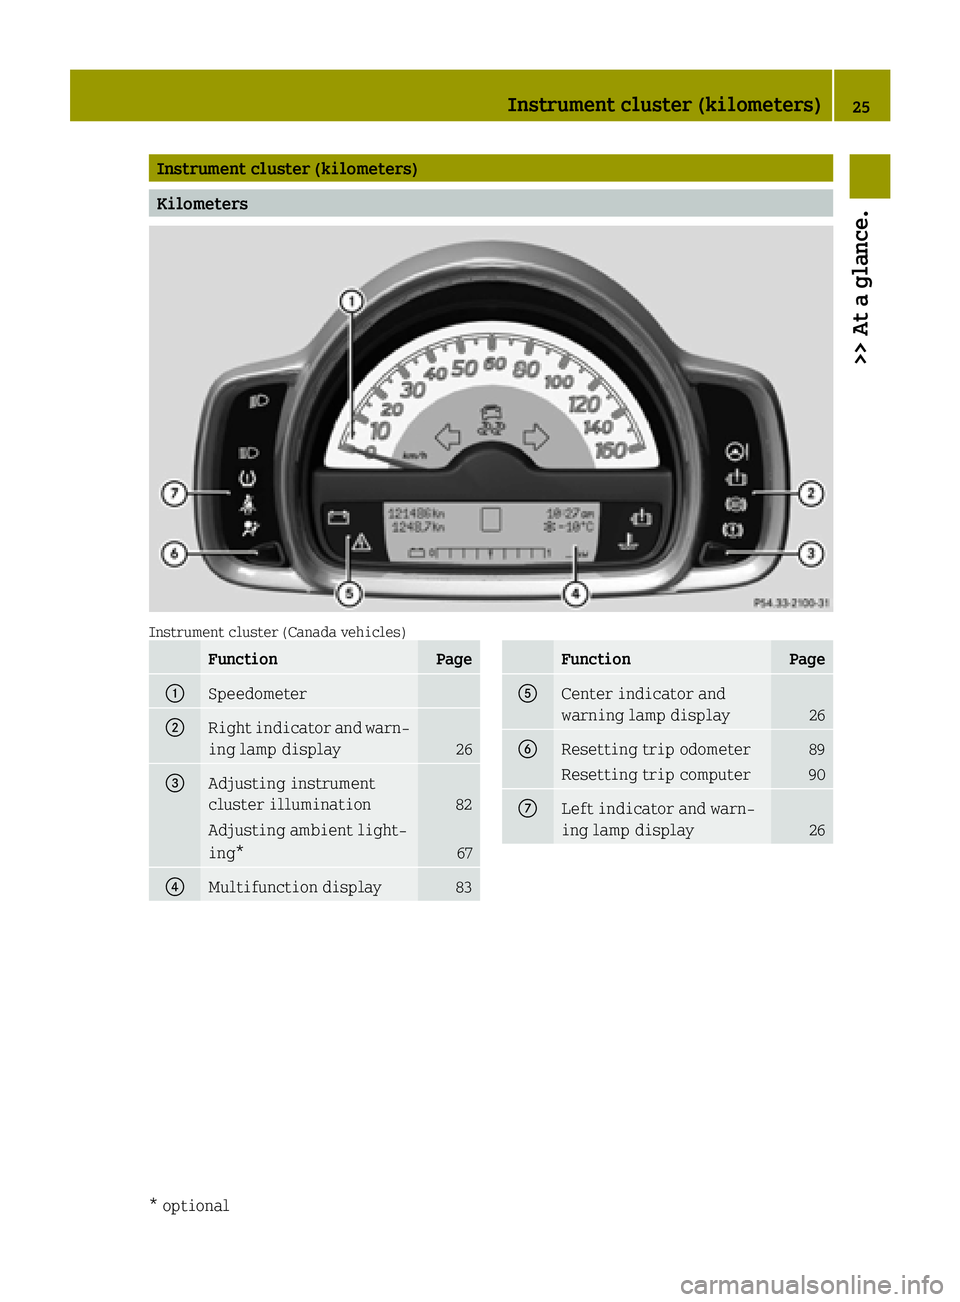 SMART FORTWO COUPE 2015  Owners Manual Instrument cluster (kilometers)
Kilometers
Instrument cluster (Canada vehicles)
Function Page
:
Speedometer
;
Right indicator and warn-
ing lamp display 26
=
Adjusting instrument
cluster illumination
